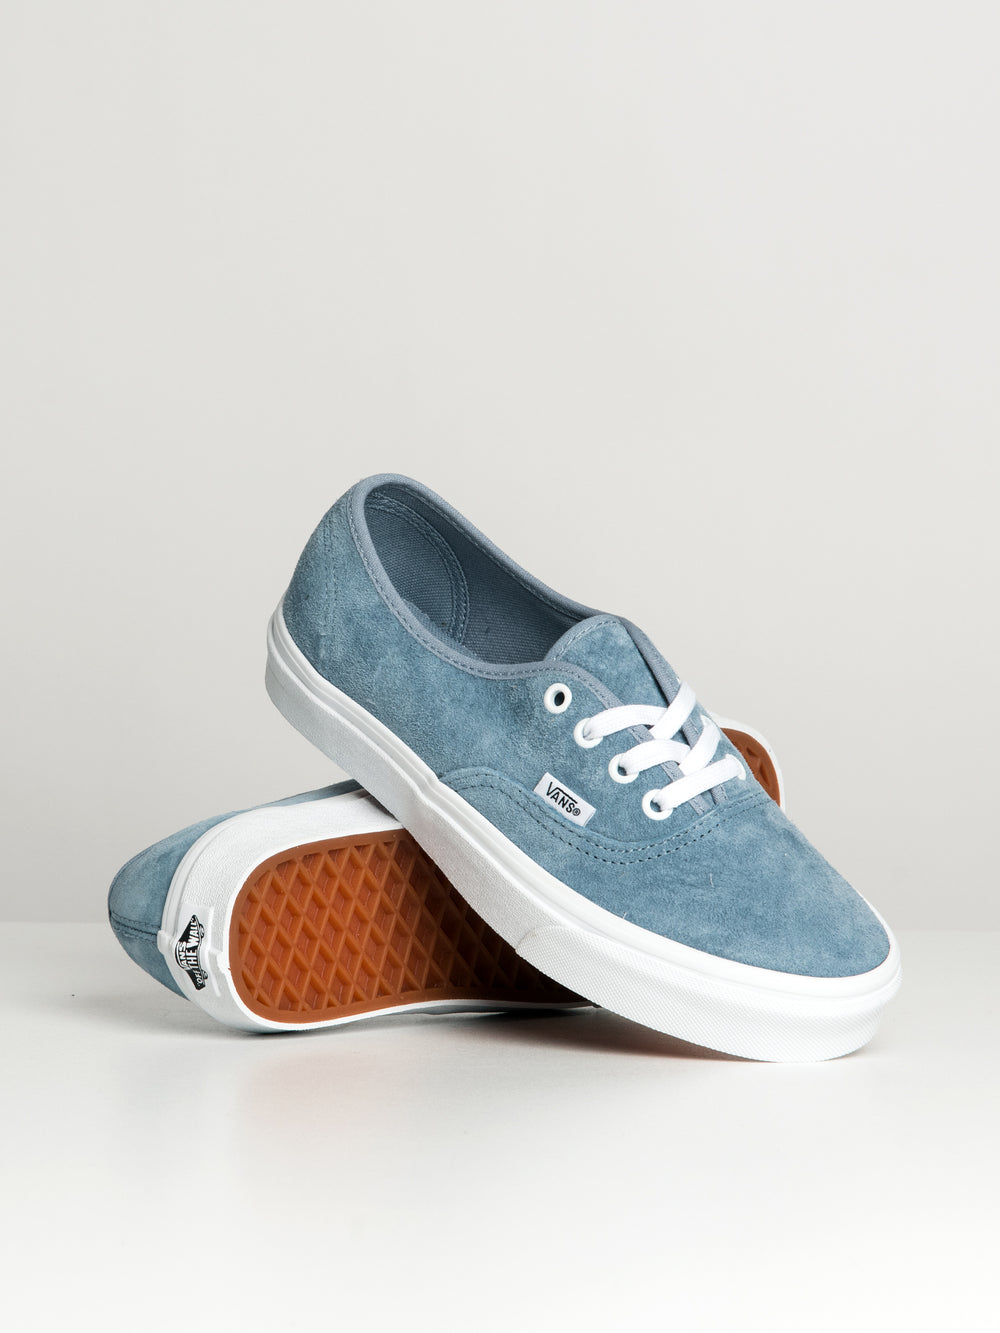 WOMENS VANS AUTHENTIC SUEDE - CLEARANCE